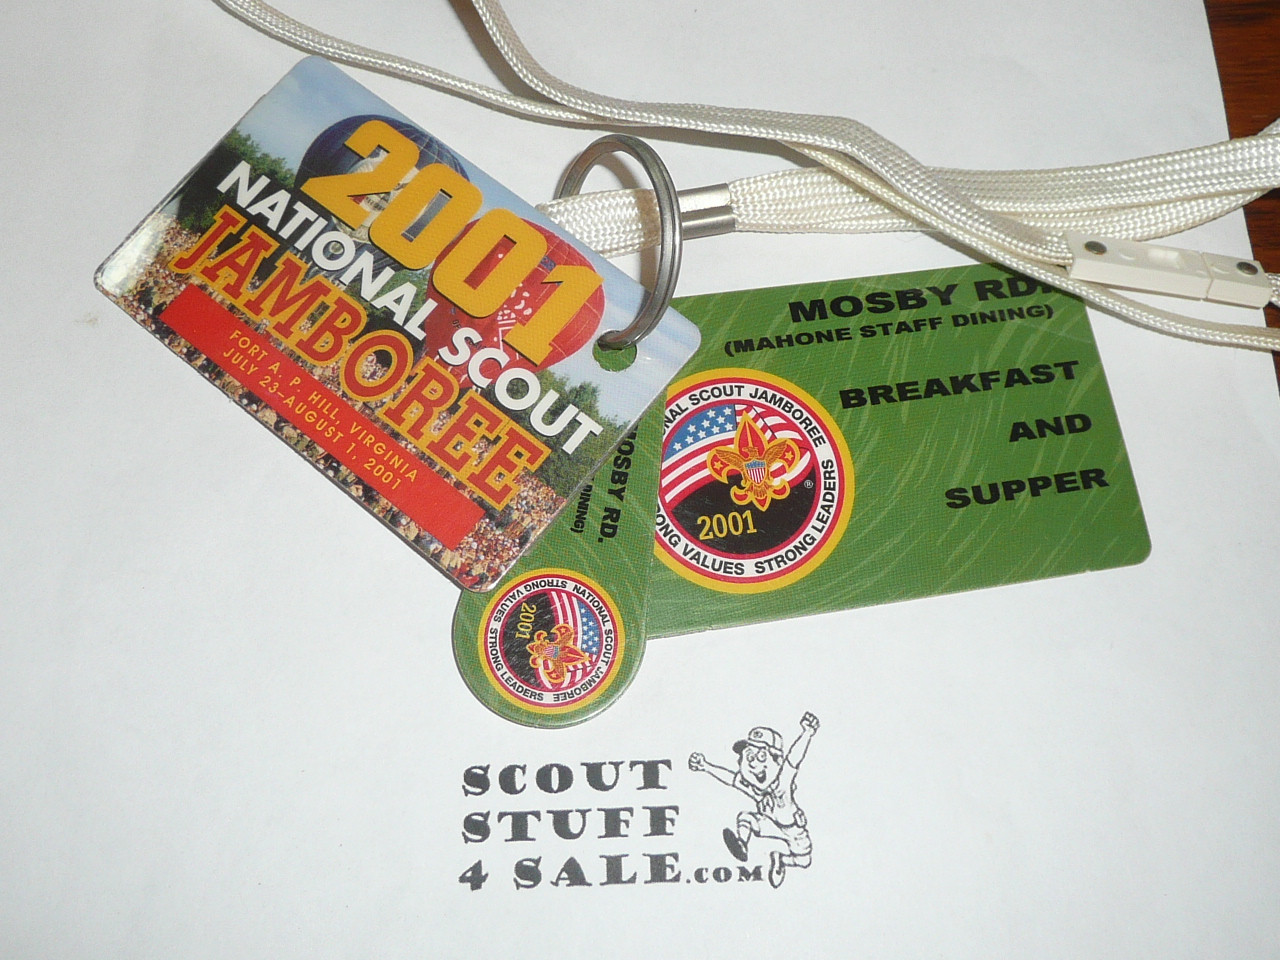 2001 National Jamboree Meal and ID cards